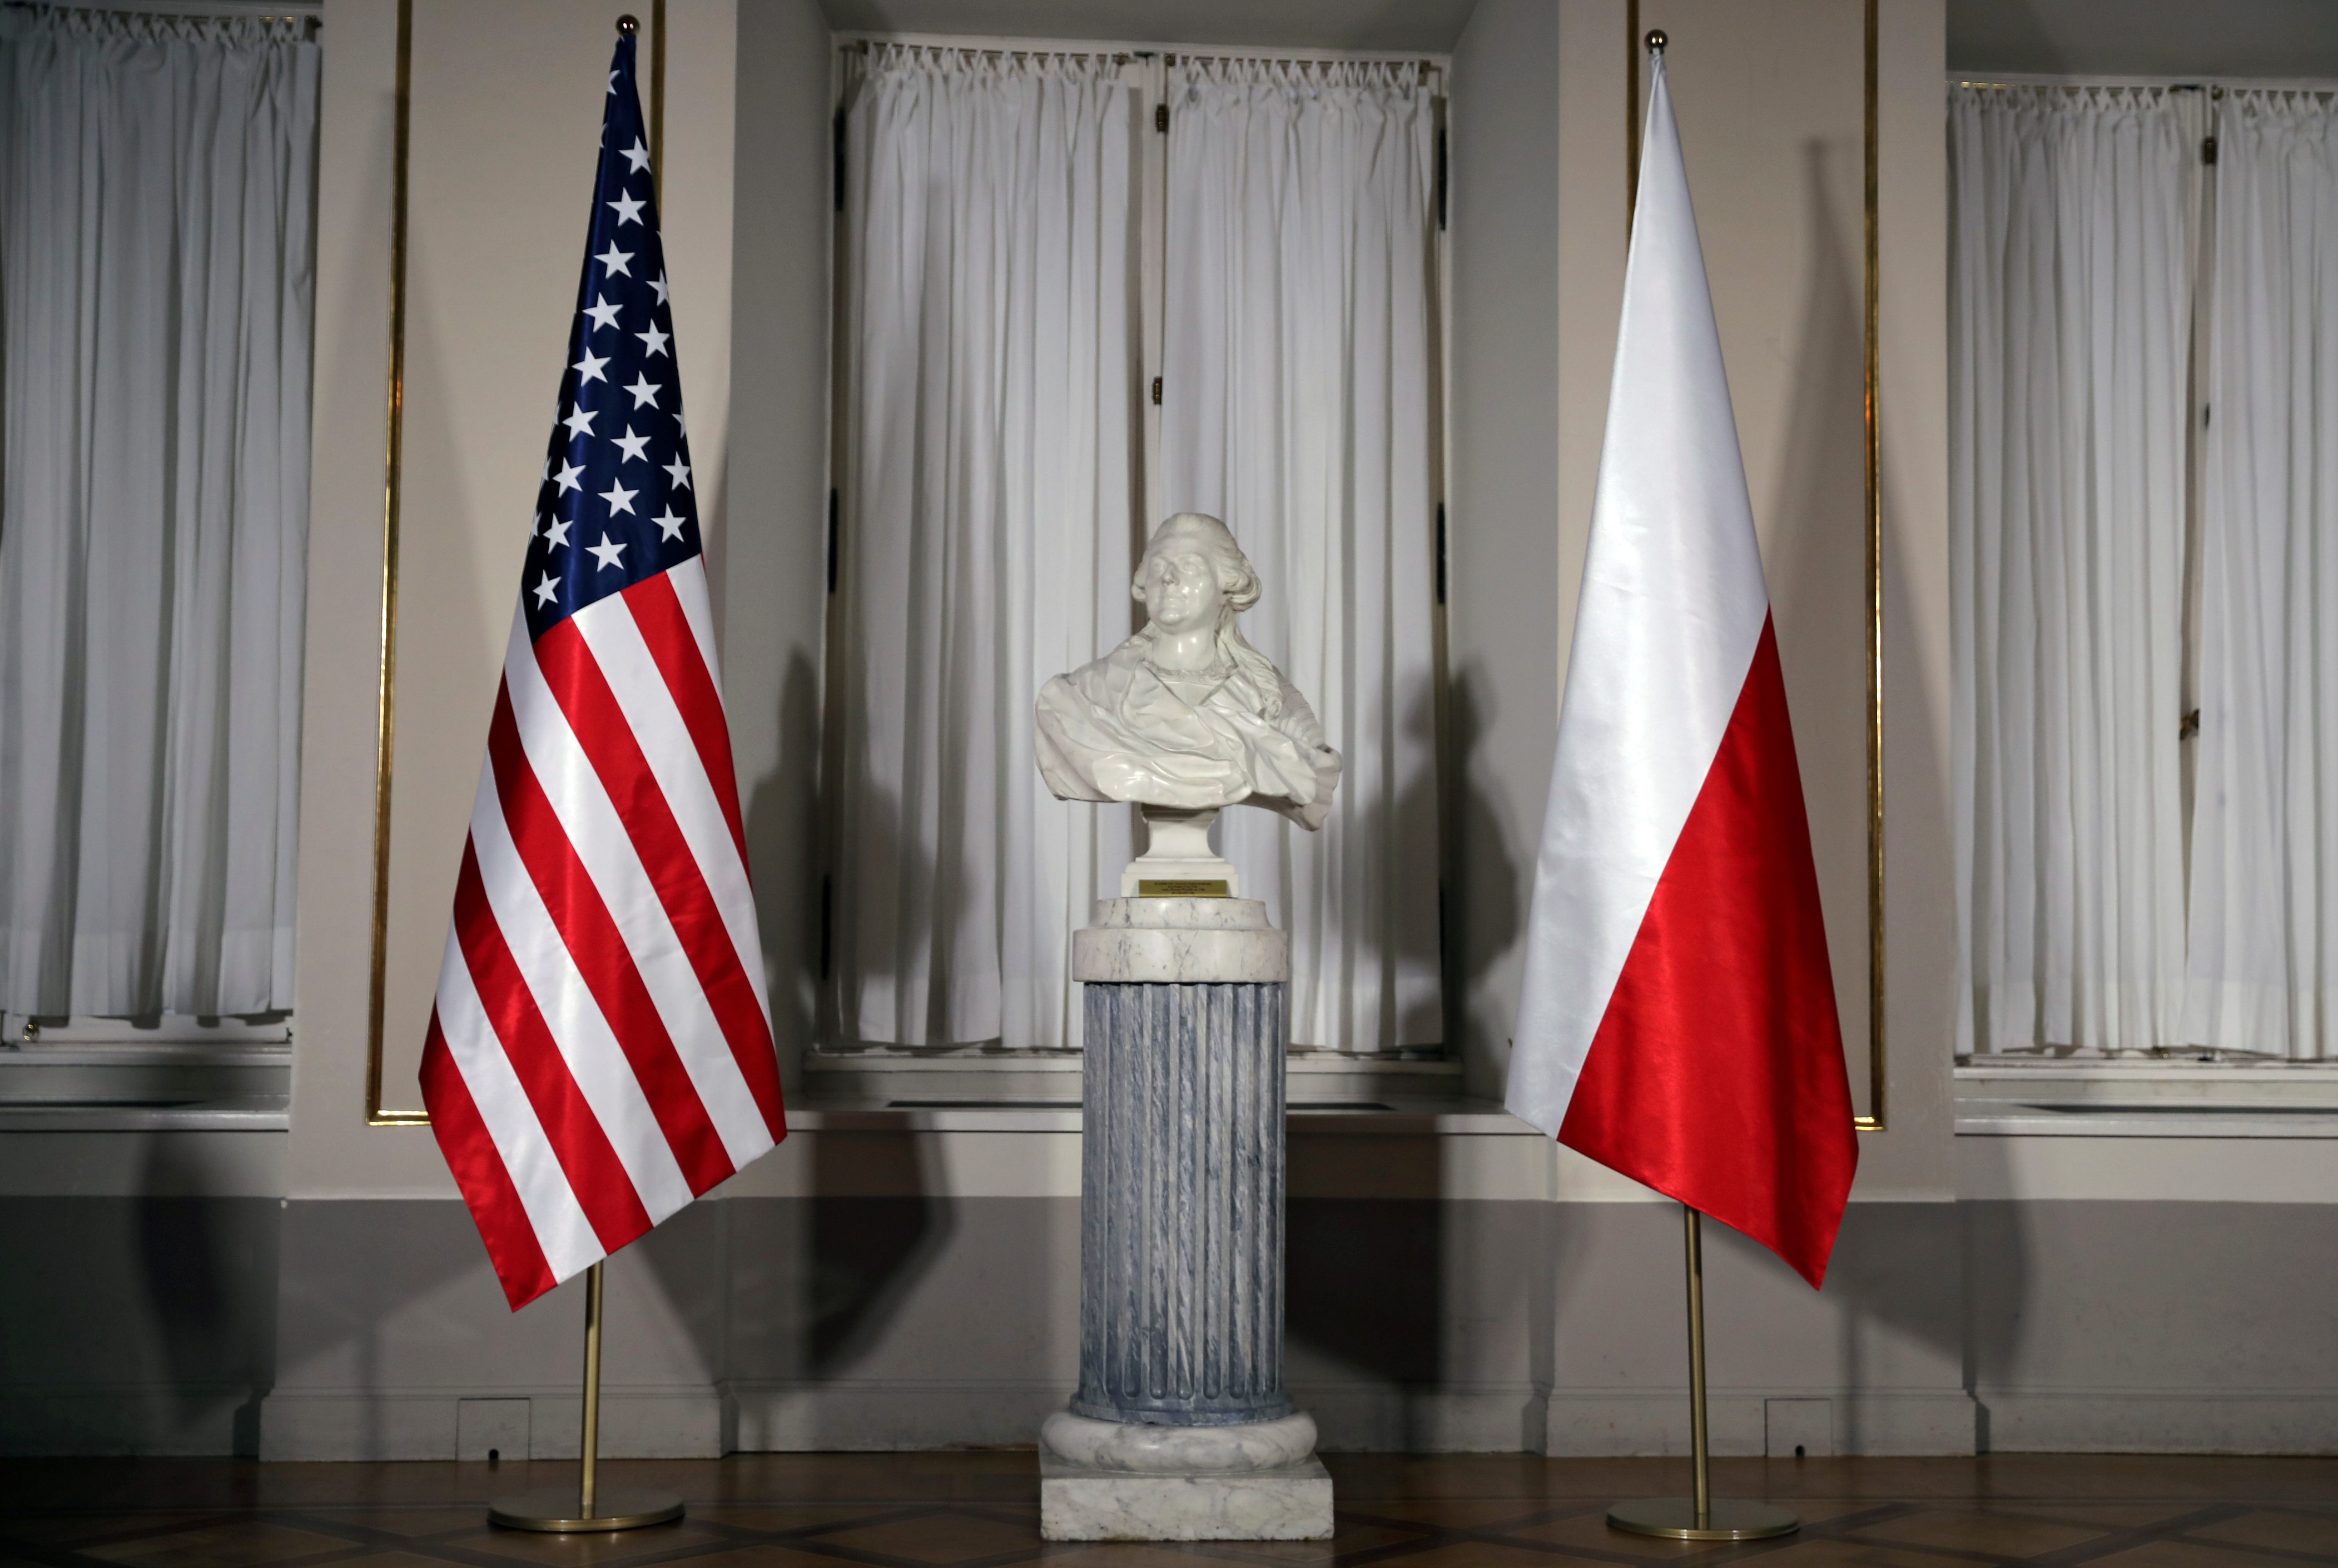 A bust of Polish composer Frederic Chopin is flanked by U.S. and Polish flags ahead of the meeting between U.S. President Trump and Polish President Duda in Warsaw